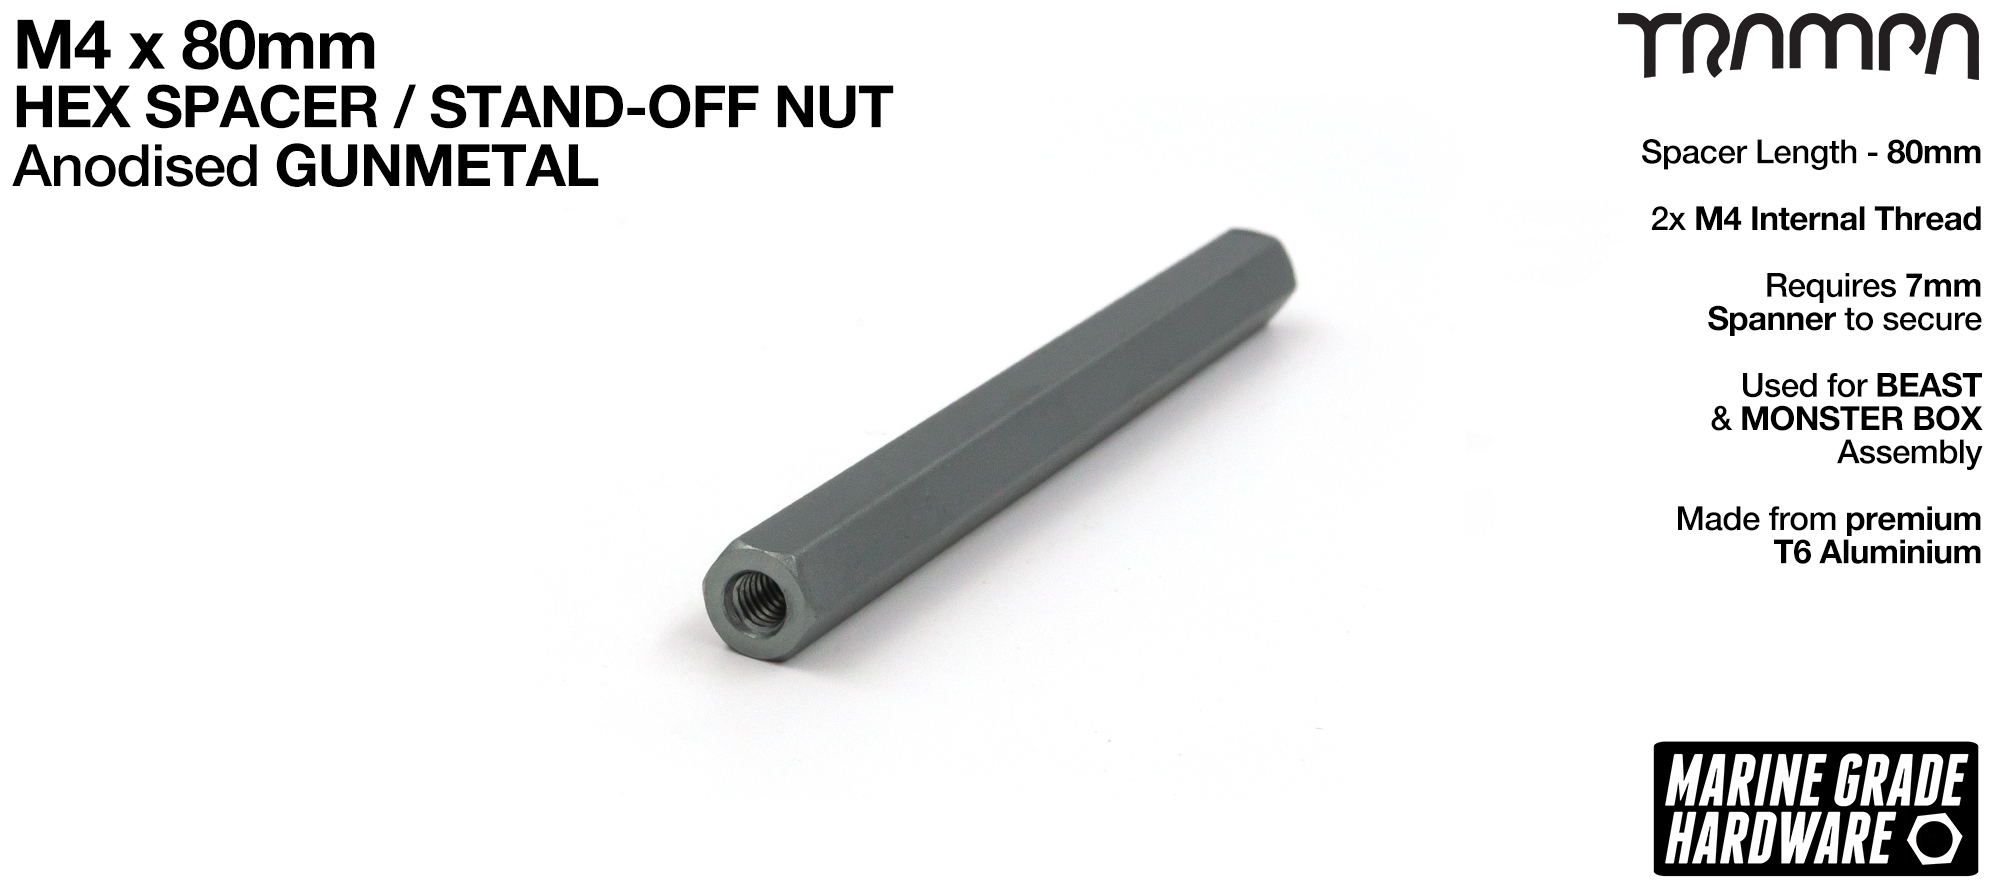 M4 x 80mm Aluminium Threaded Spacer Nut Used for assembling the BEAST Battery Boxes - GUNMETAL